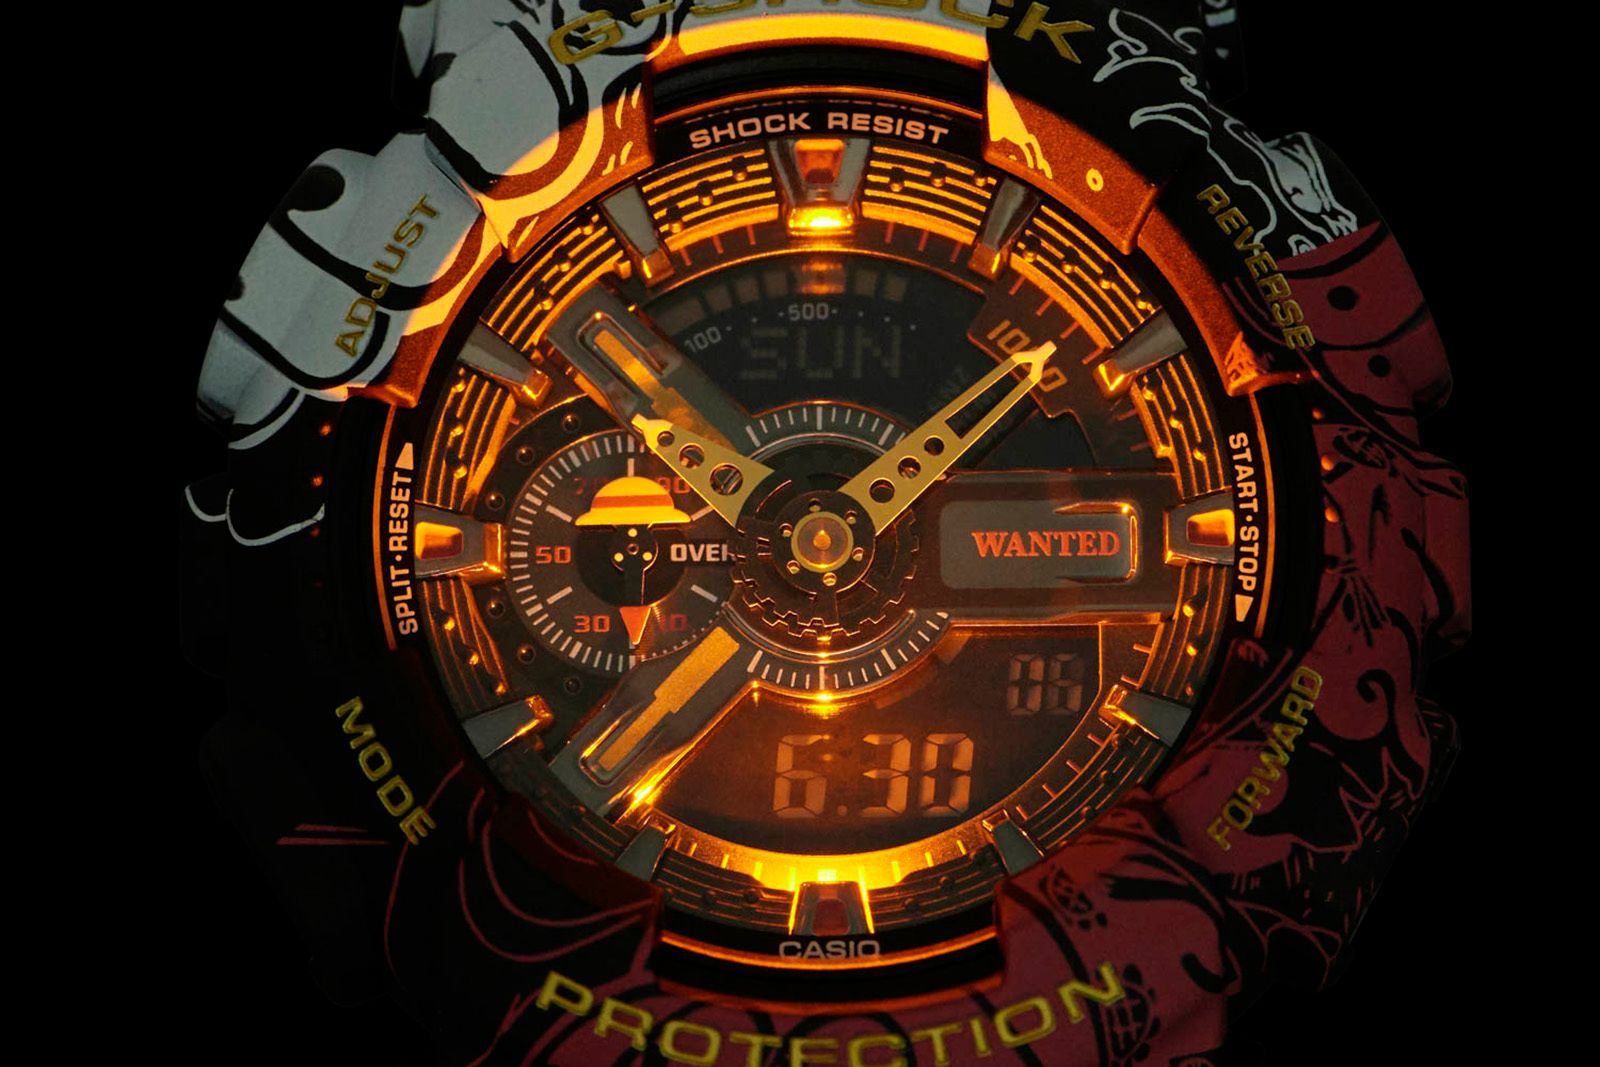 Casio G-Shock x One Piece is another instantly classic collectable watch image 1